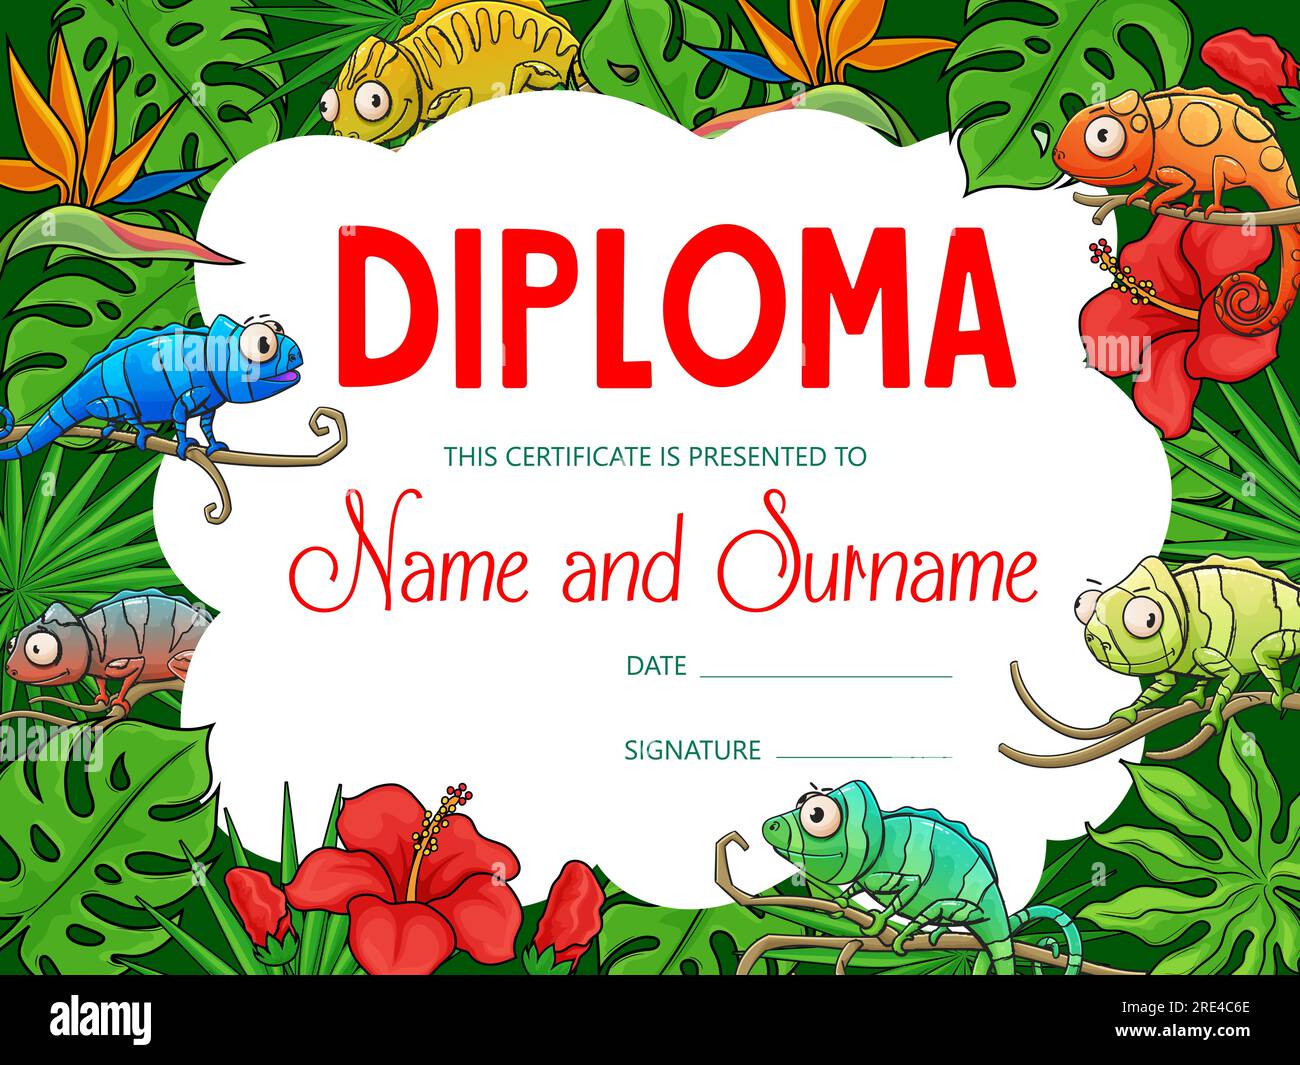 Kids education diploma with cartoon chameleons in tropical jungle. Vector certificate of school graduation, achievement award and honor gift with background frame of chameleon lizards and palm flowers Stock Vector